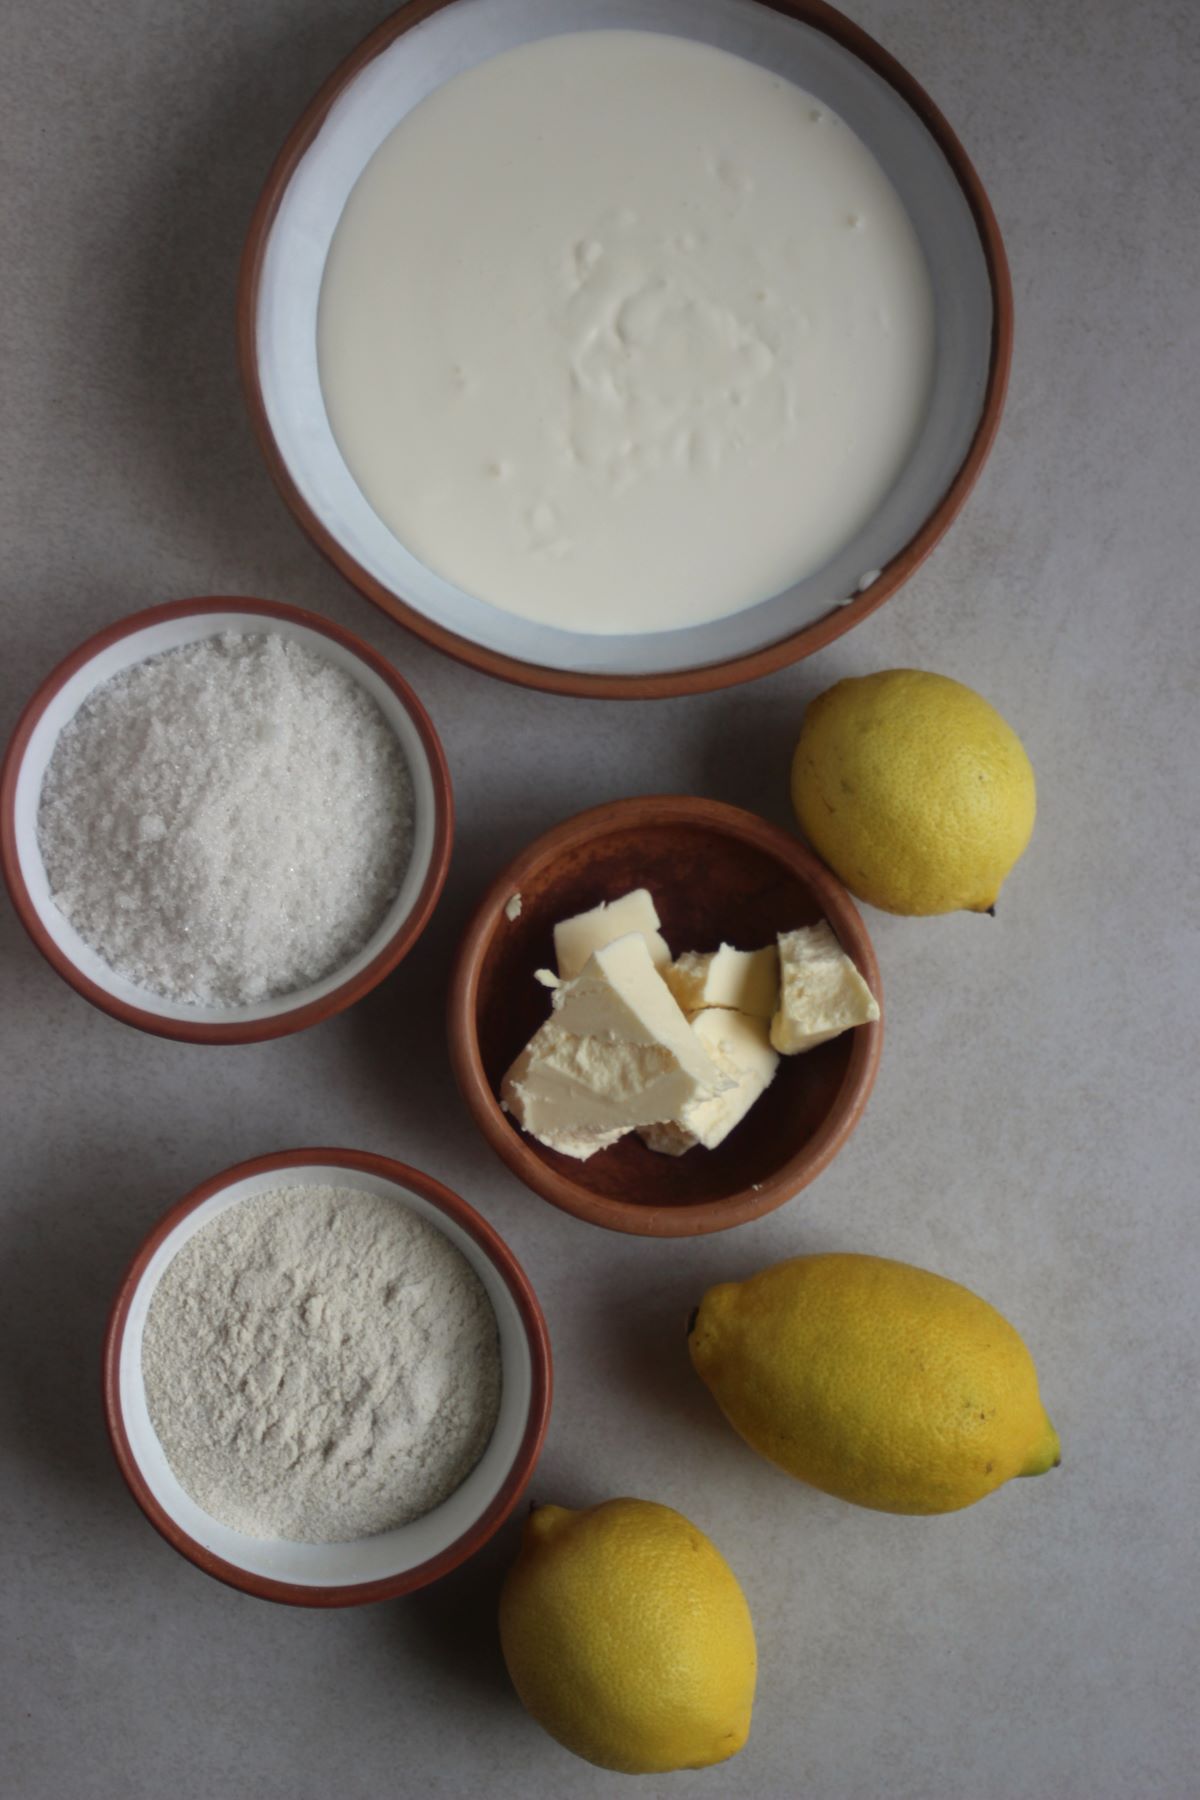 Lemon Posset ingredients on different plates seen from above.